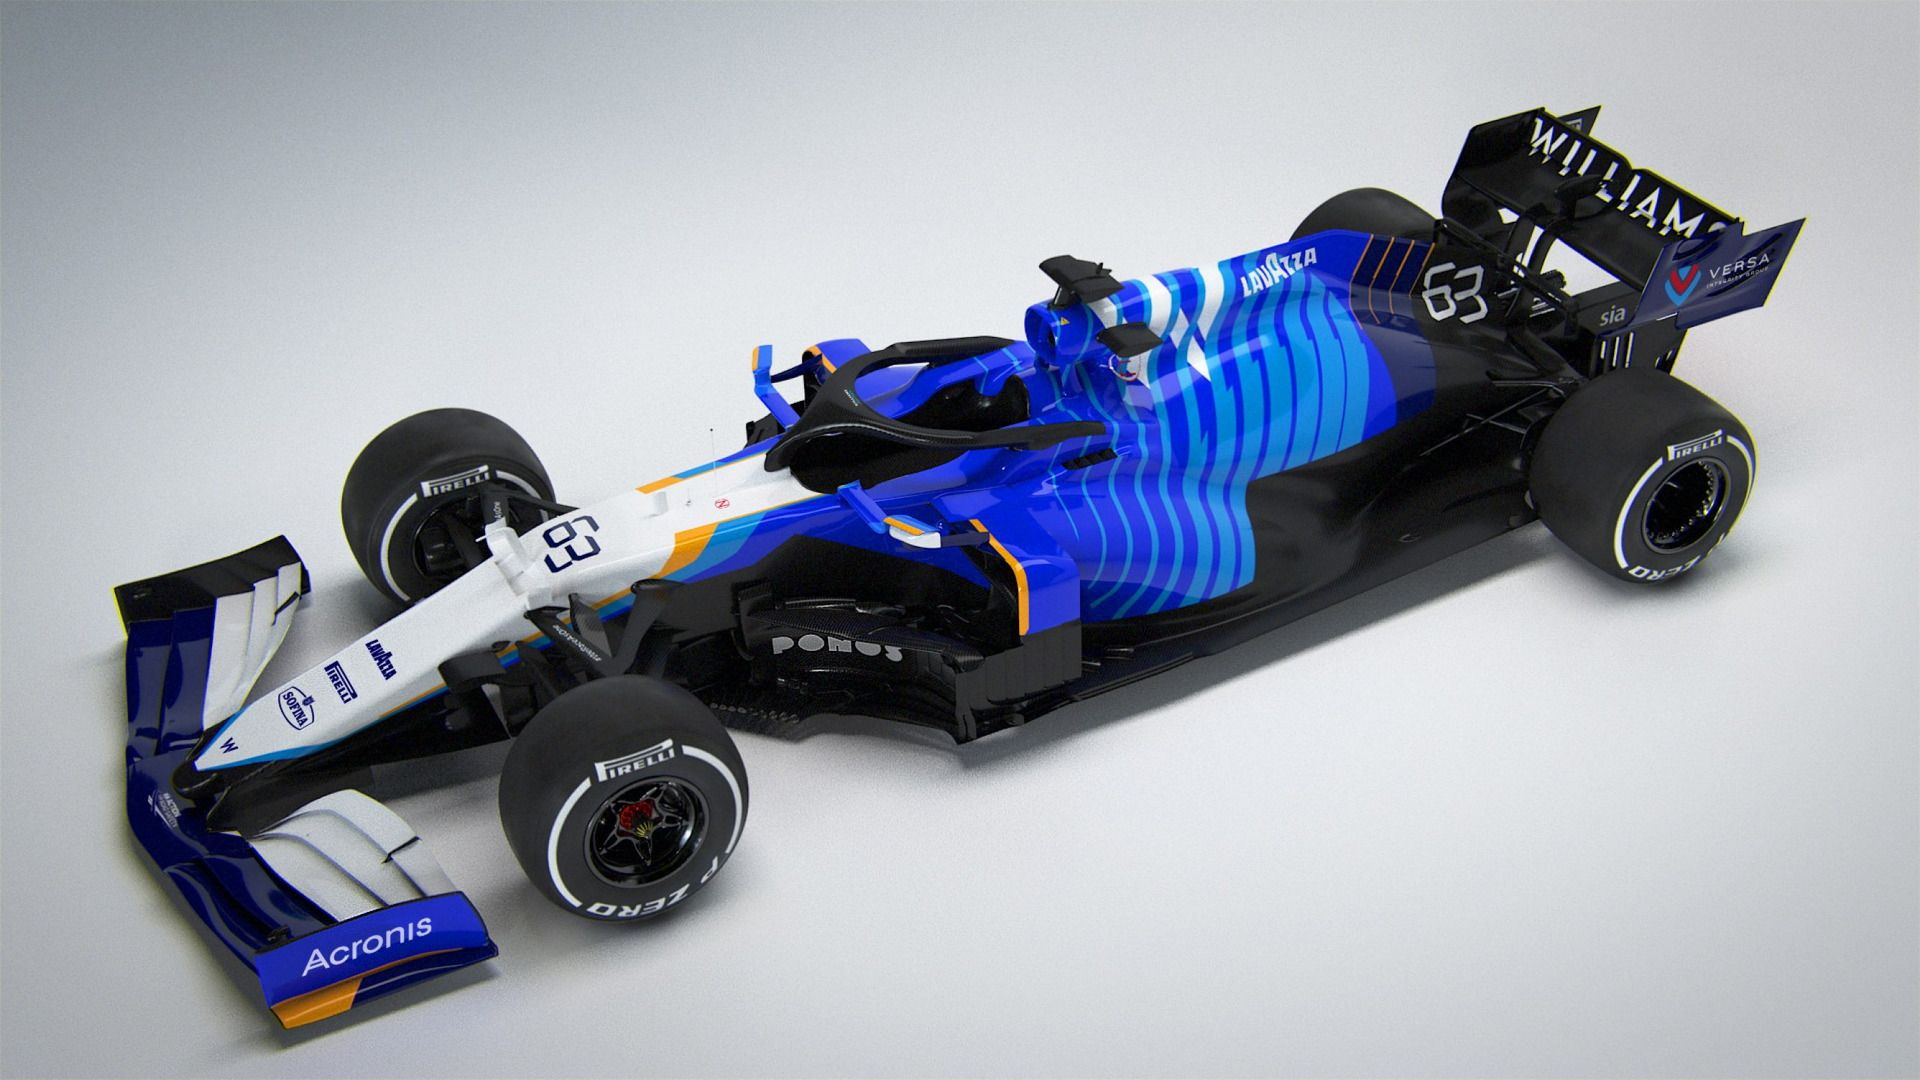 Williams Releases Image Of 2021 F1 Car After Hackers Spoil Special AR Launch